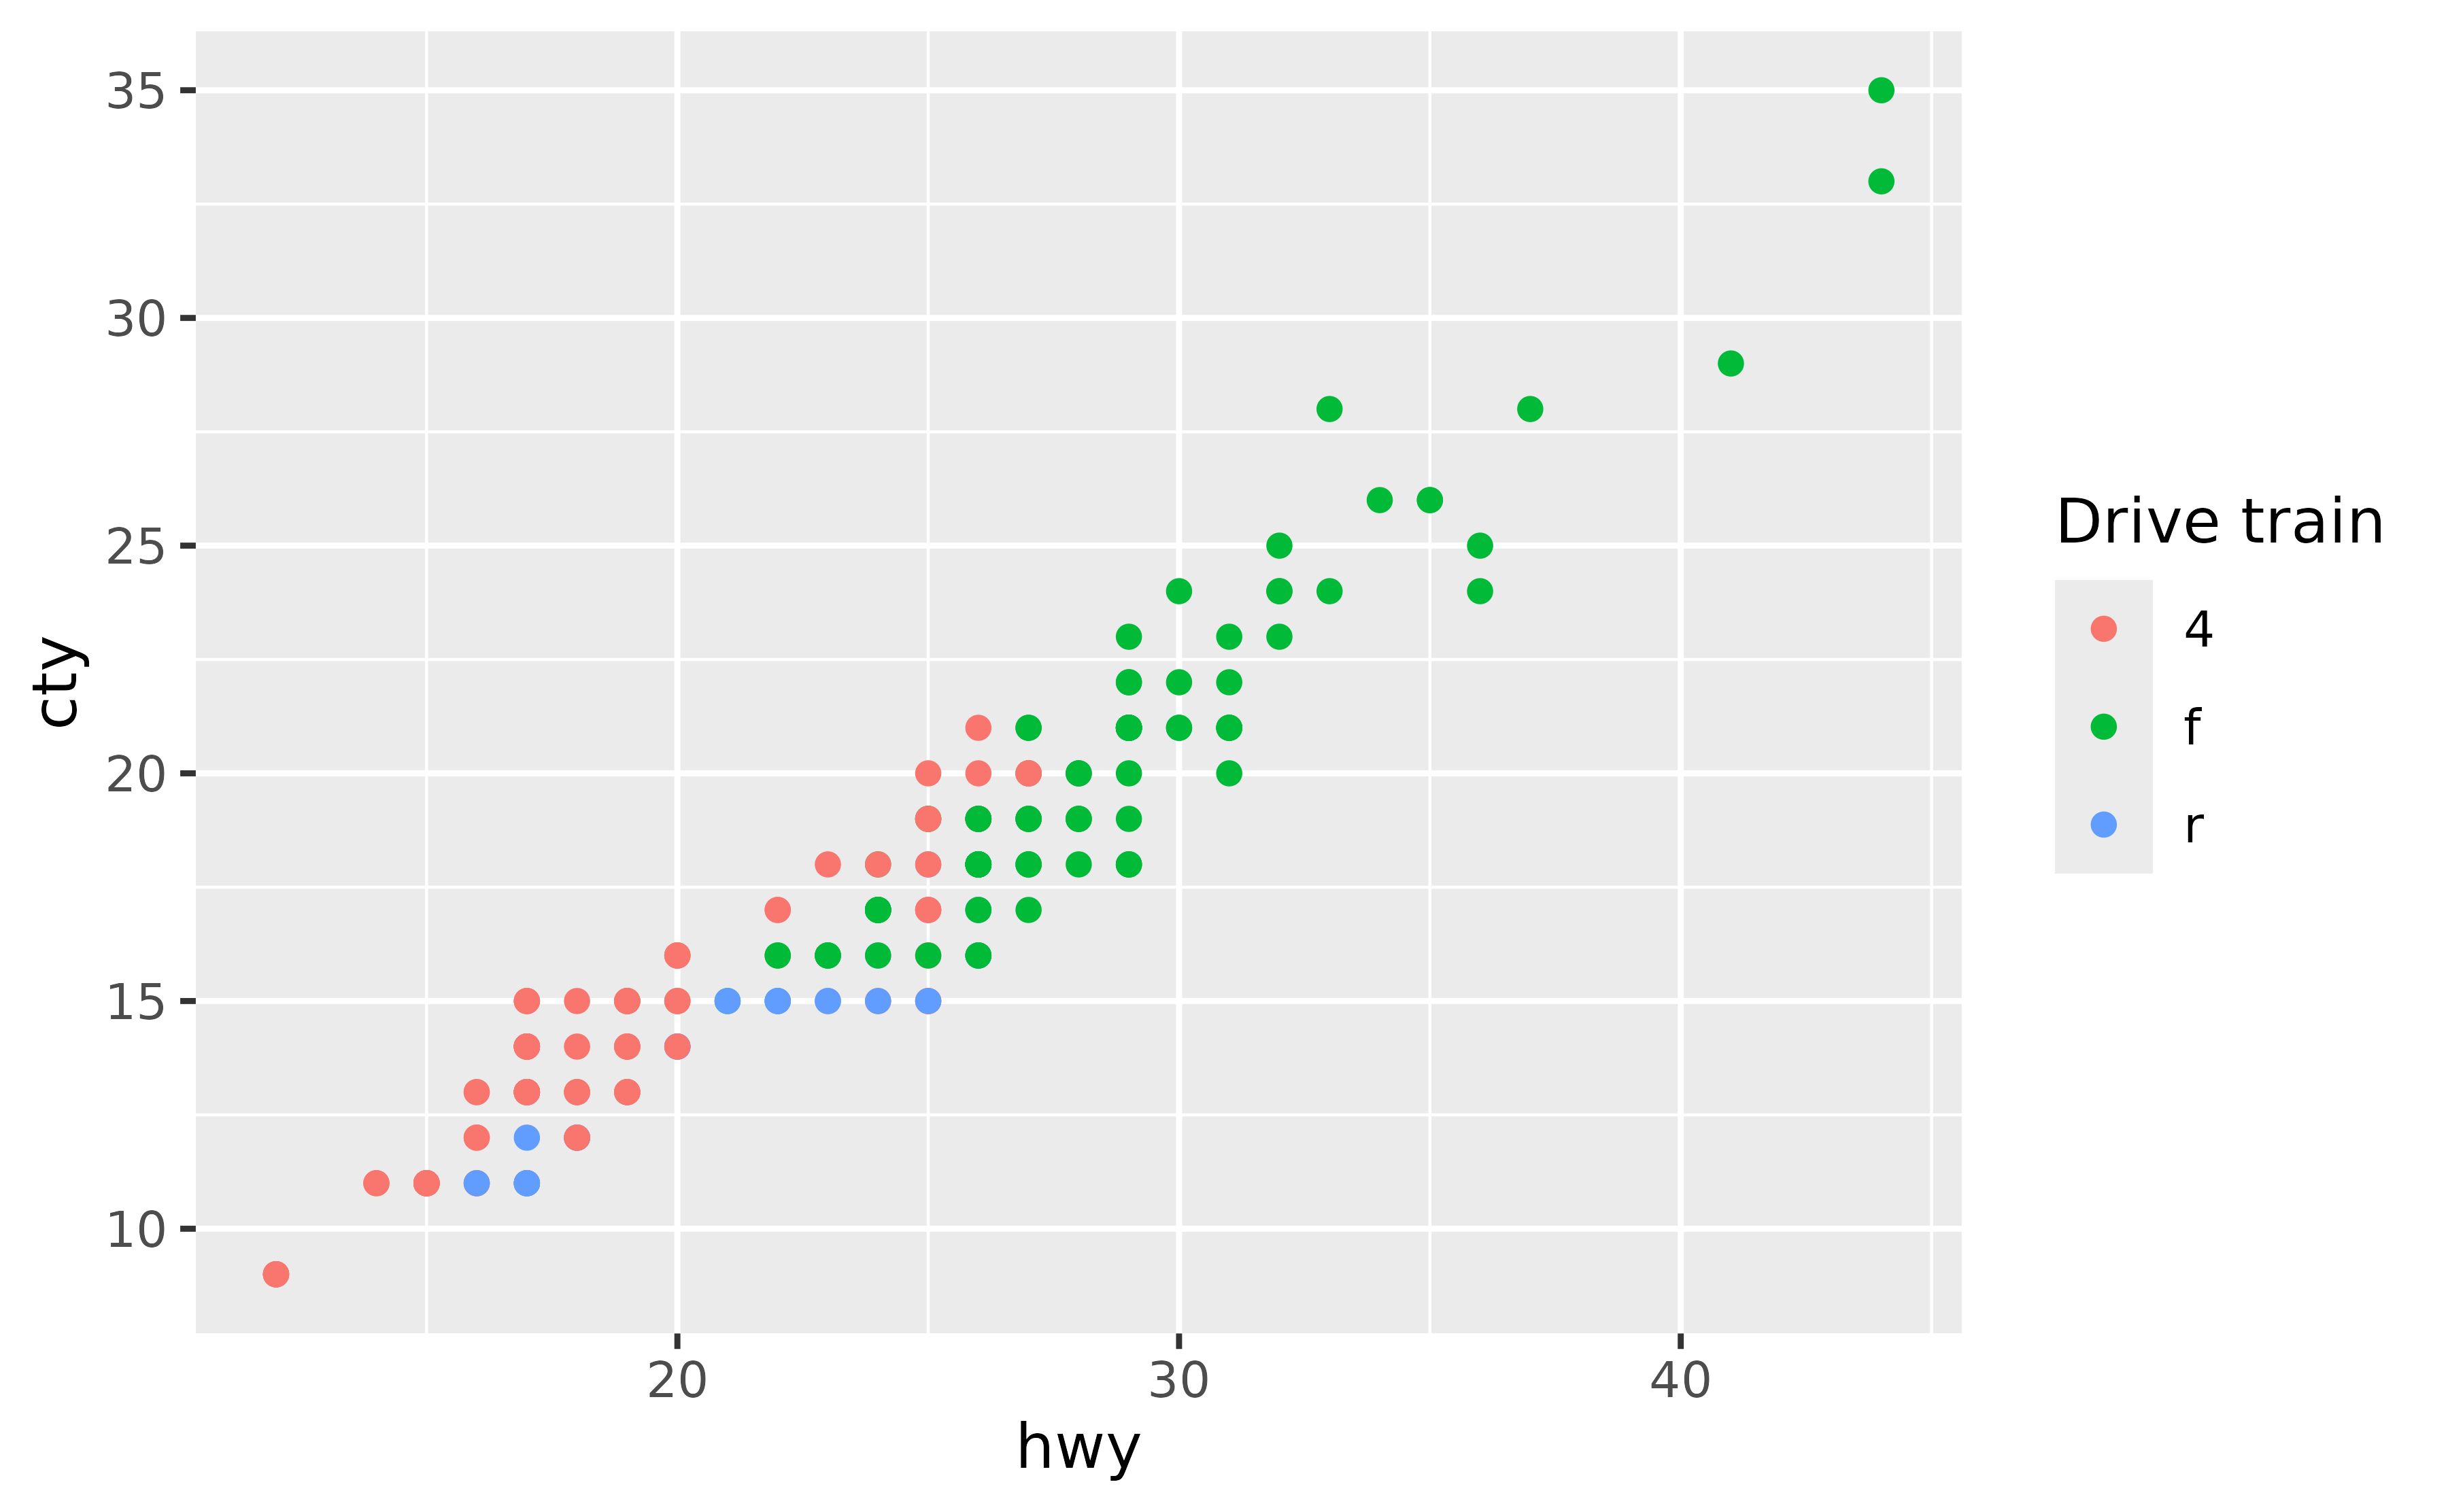 A scatter plot showing the highway miles per gallon on the x-axis and city miles per gallon on the y-axis. The points are coloured by three types of drive train, which is displayed in a legend with the title 'Drive train'.